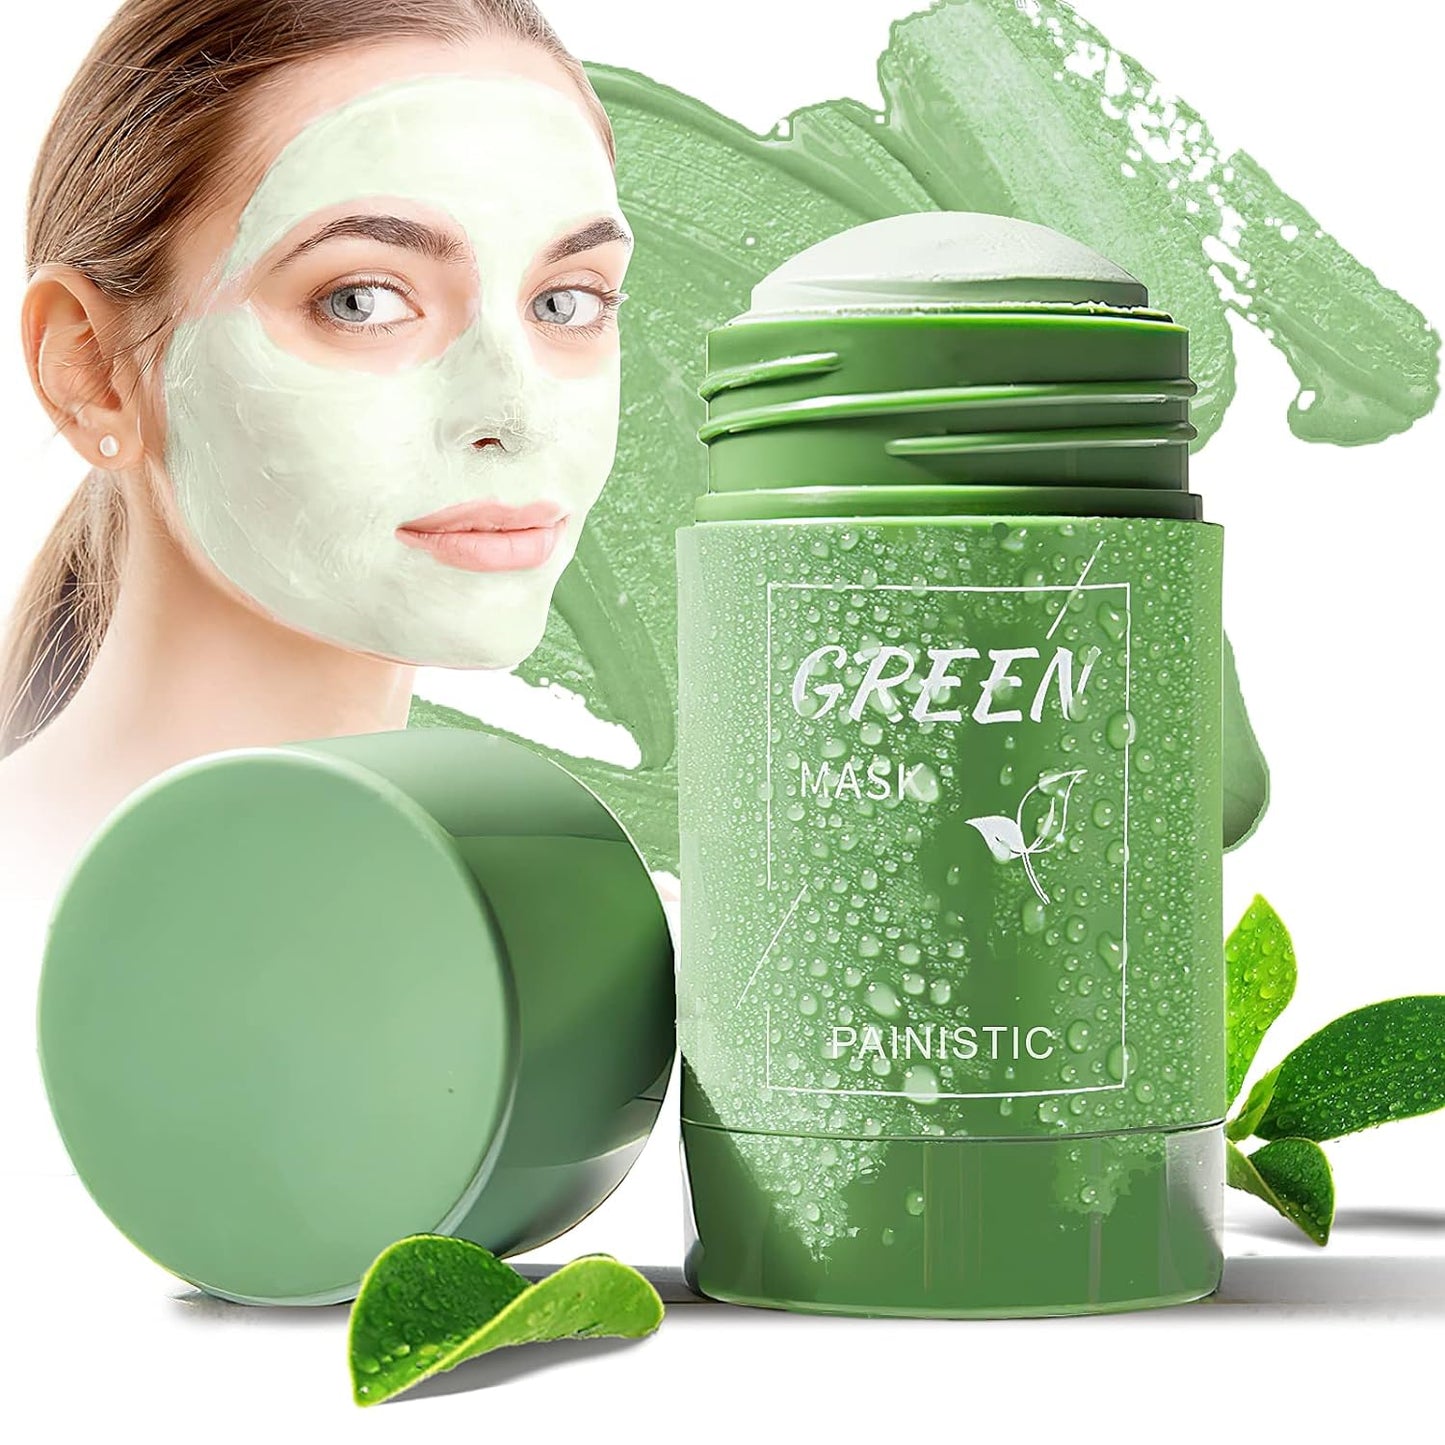 Cleansing Mask Stick